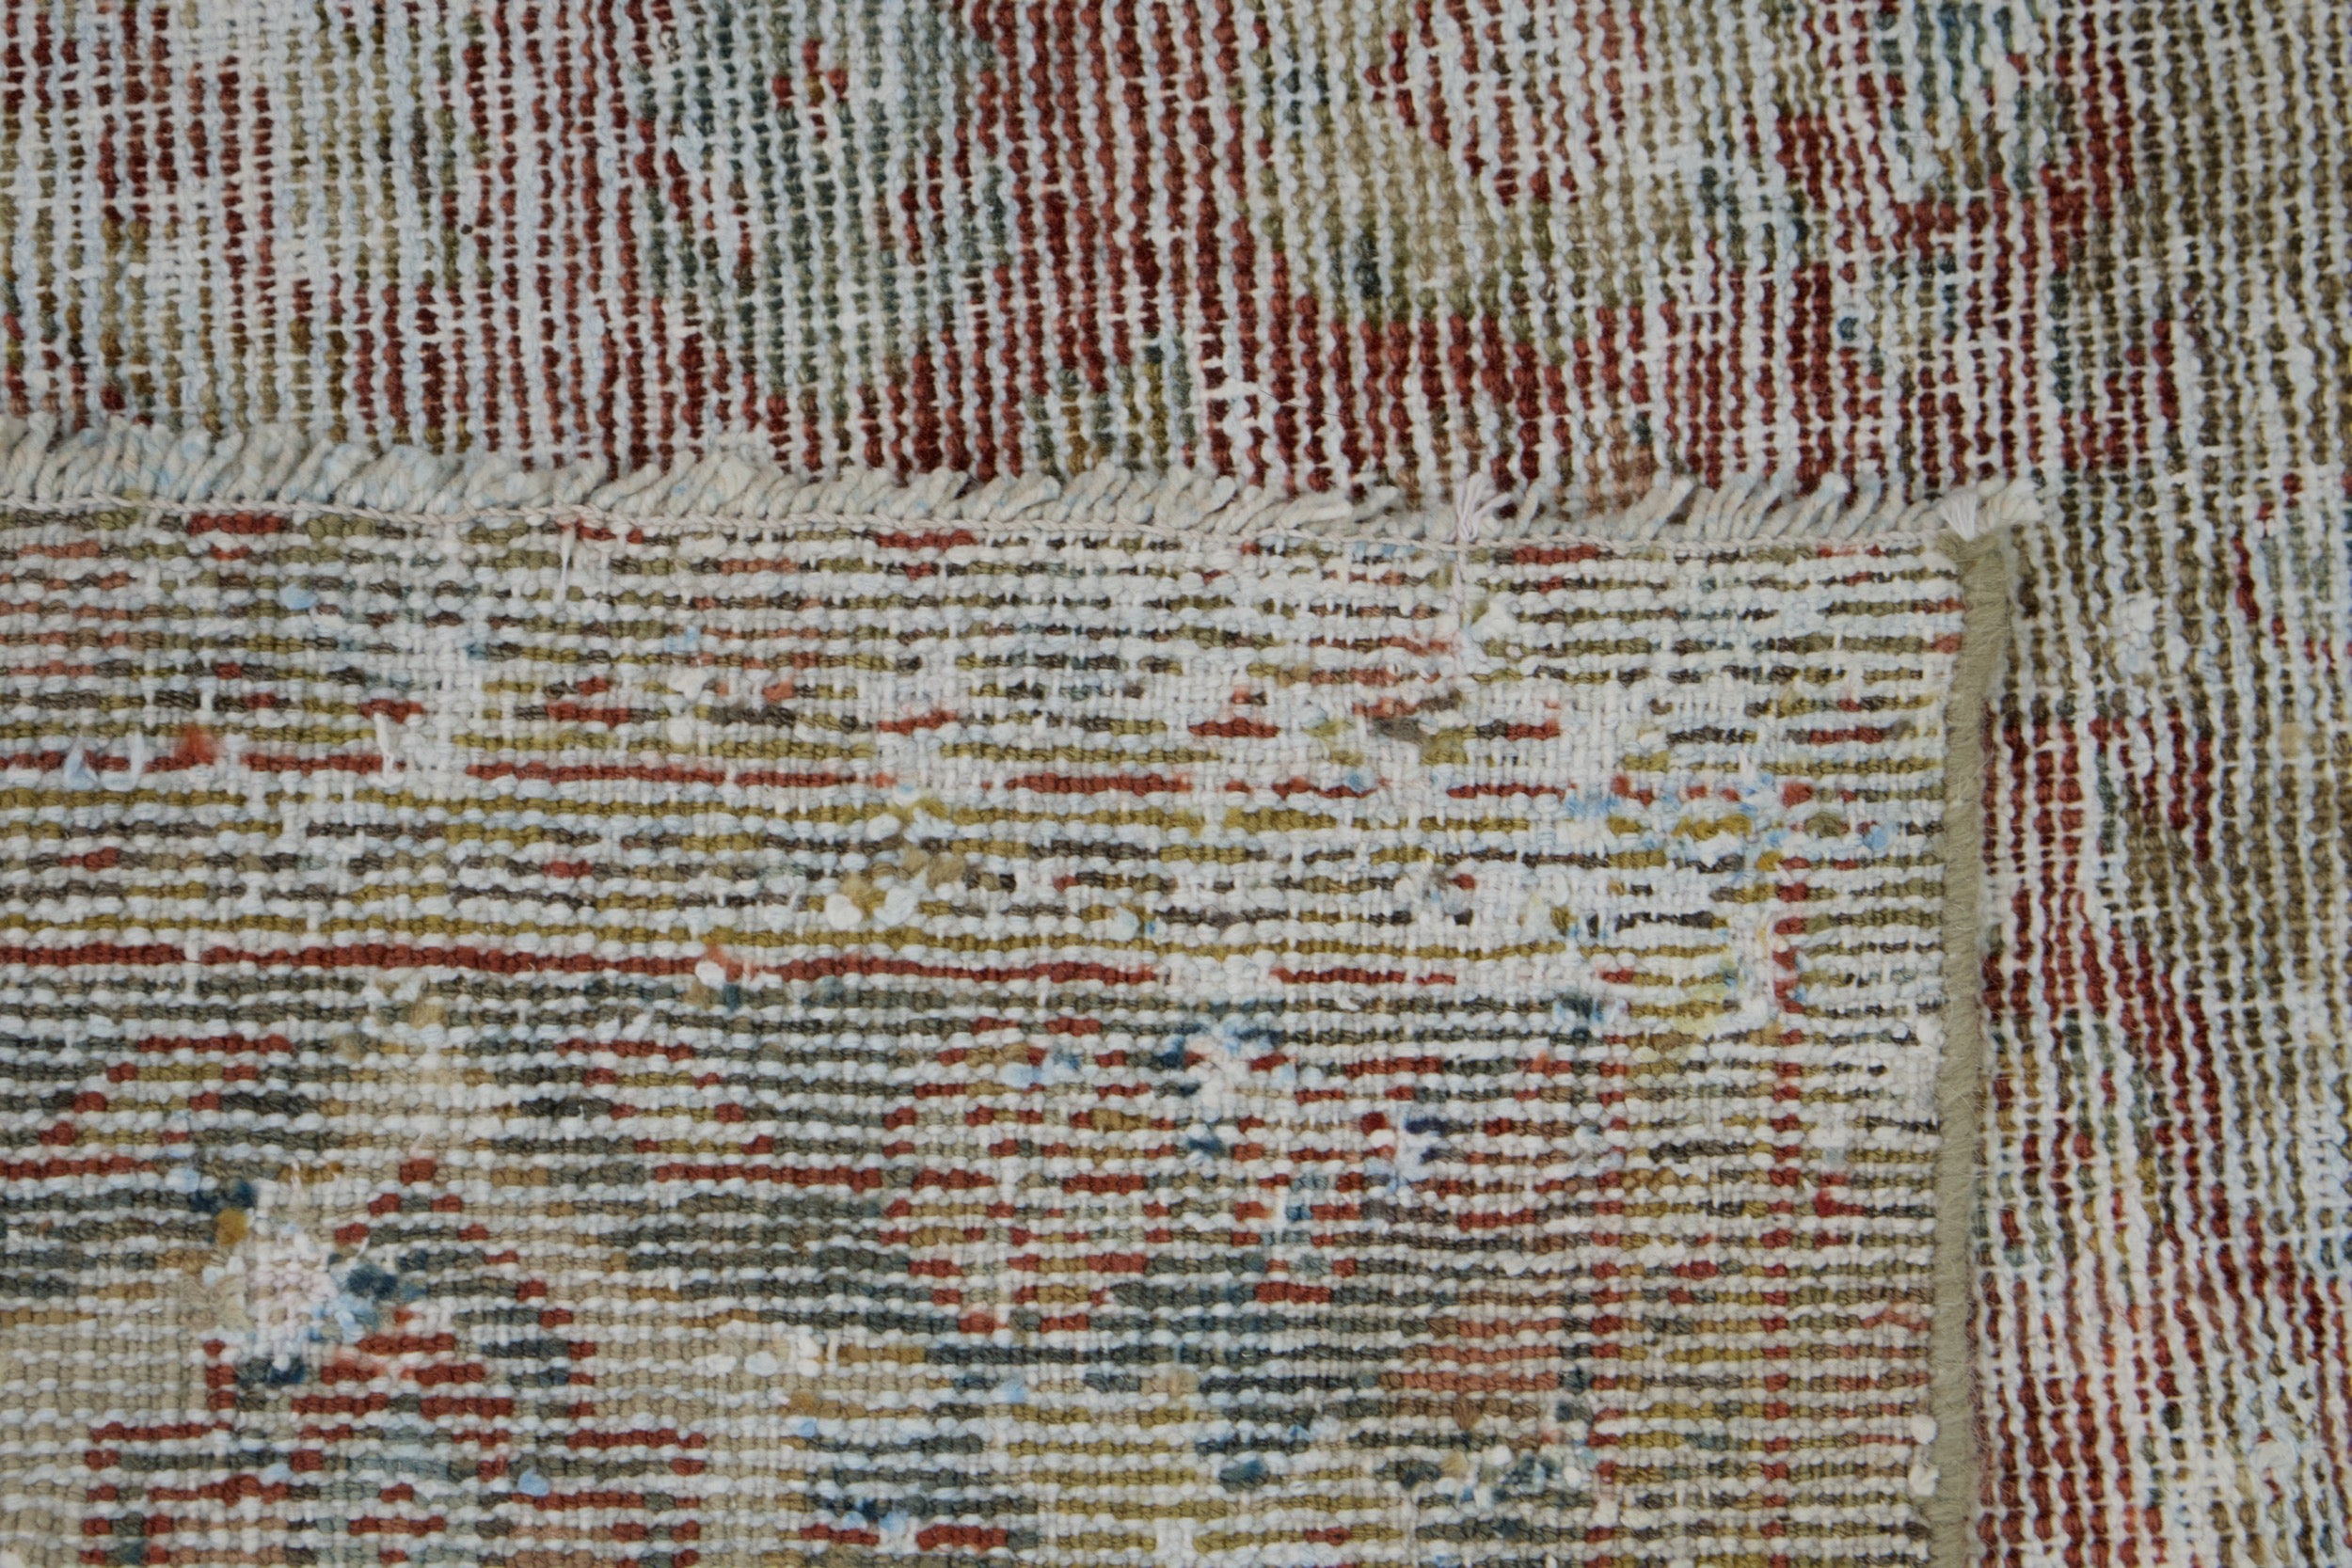 The Artisanal Depth of Farycka - Wool and Cotton Blend | Kuden Rugs